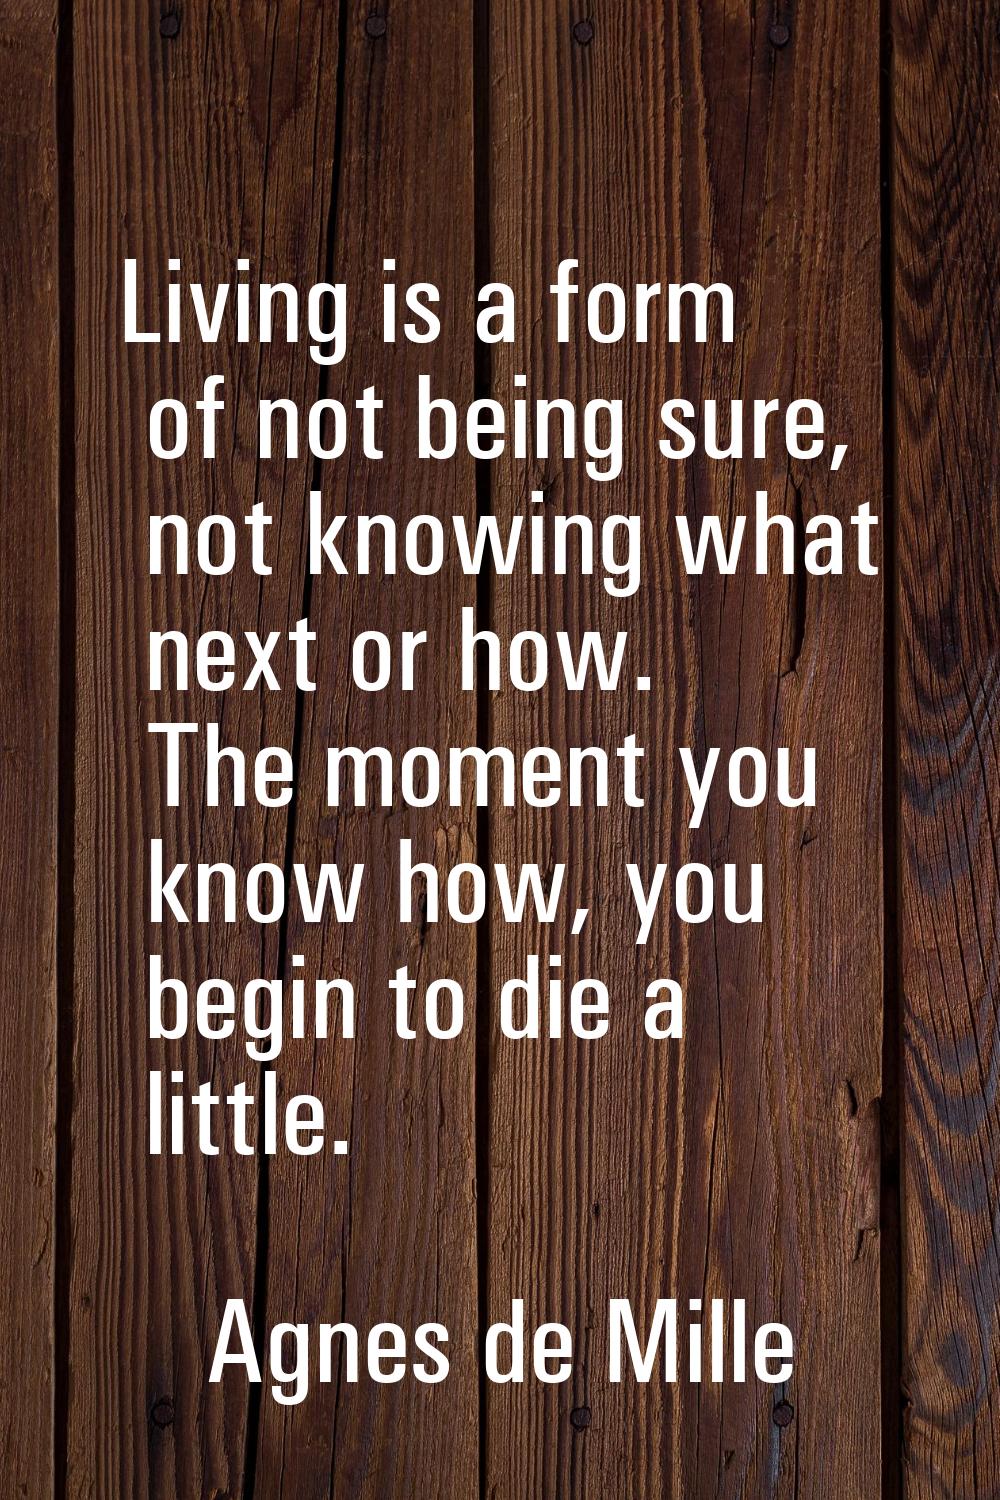 Living is a form of not being sure, not knowing what next or how. The moment you know how, you begi